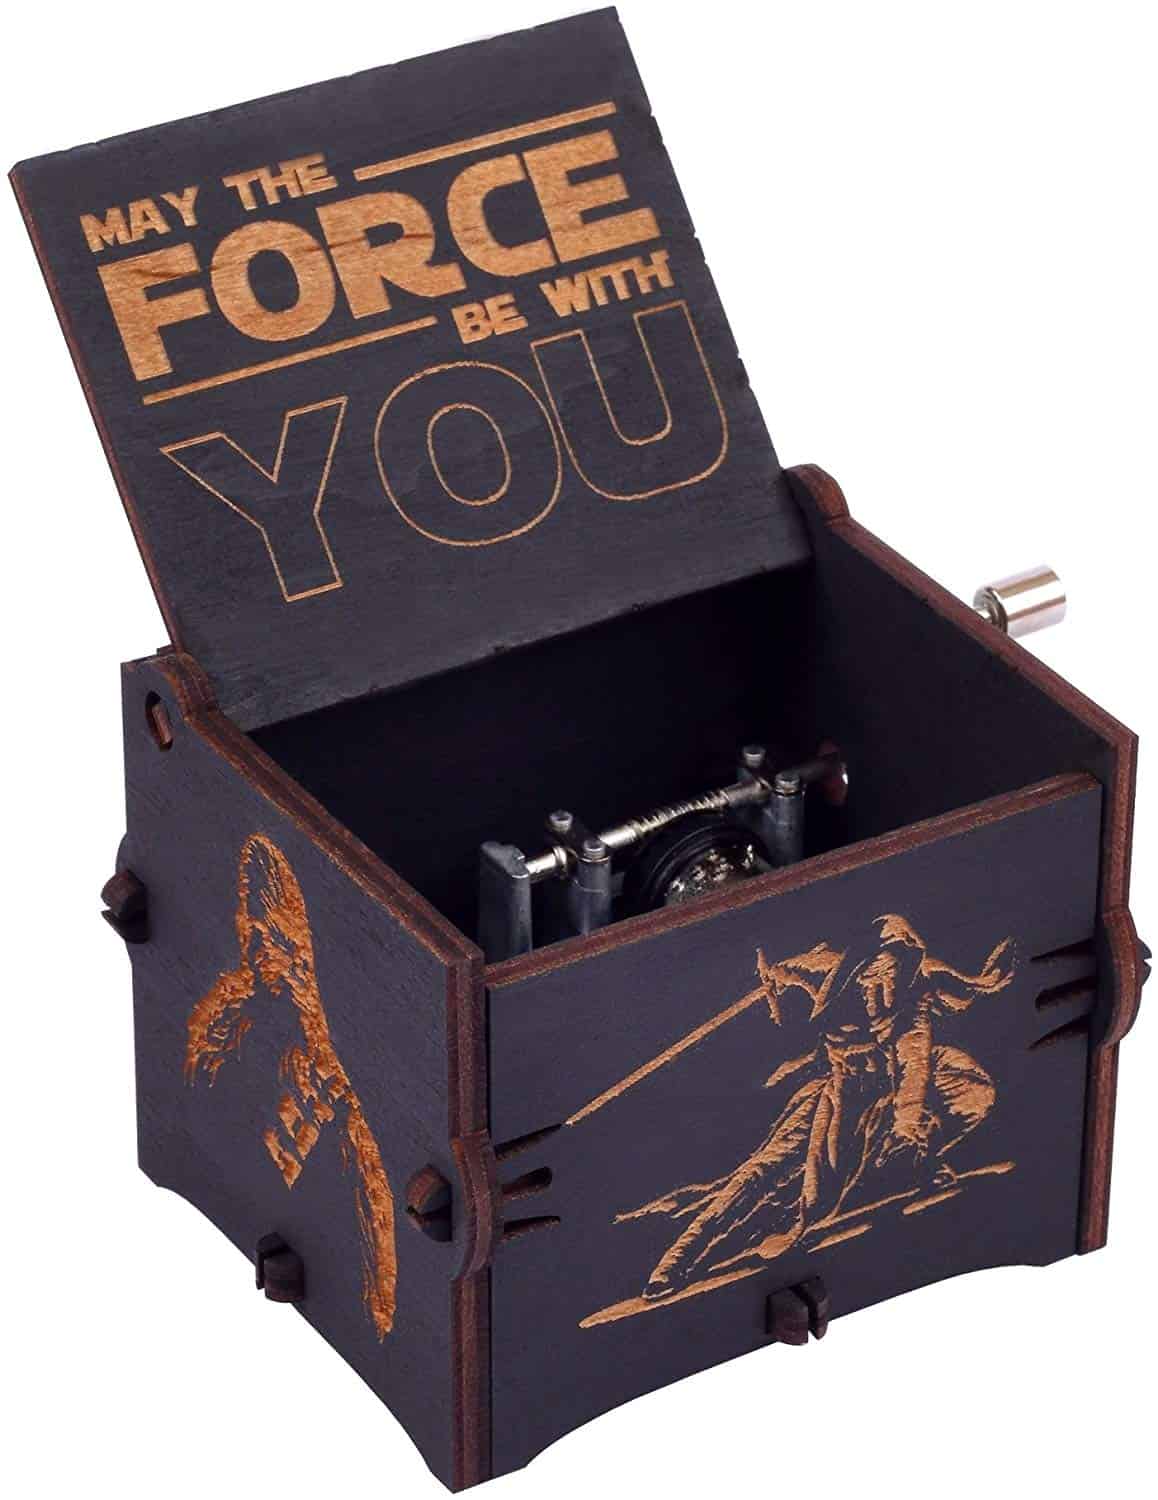 The Wood Star Wars Music Box Wooden